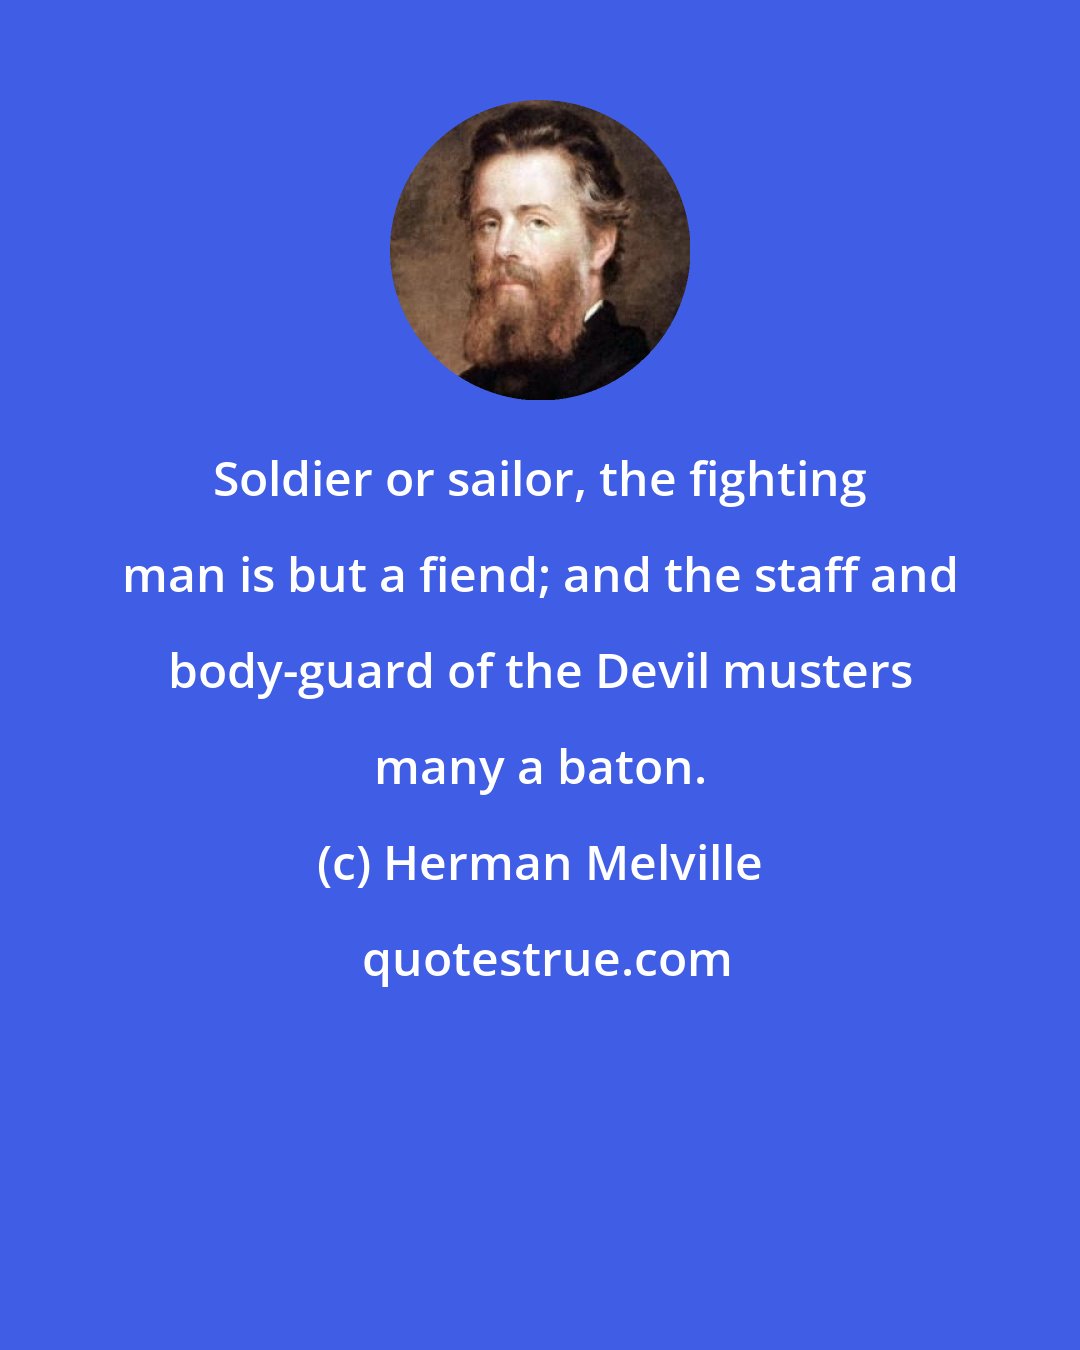 Herman Melville: Soldier or sailor, the fighting man is but a fiend; and the staff and body-guard of the Devil musters many a baton.